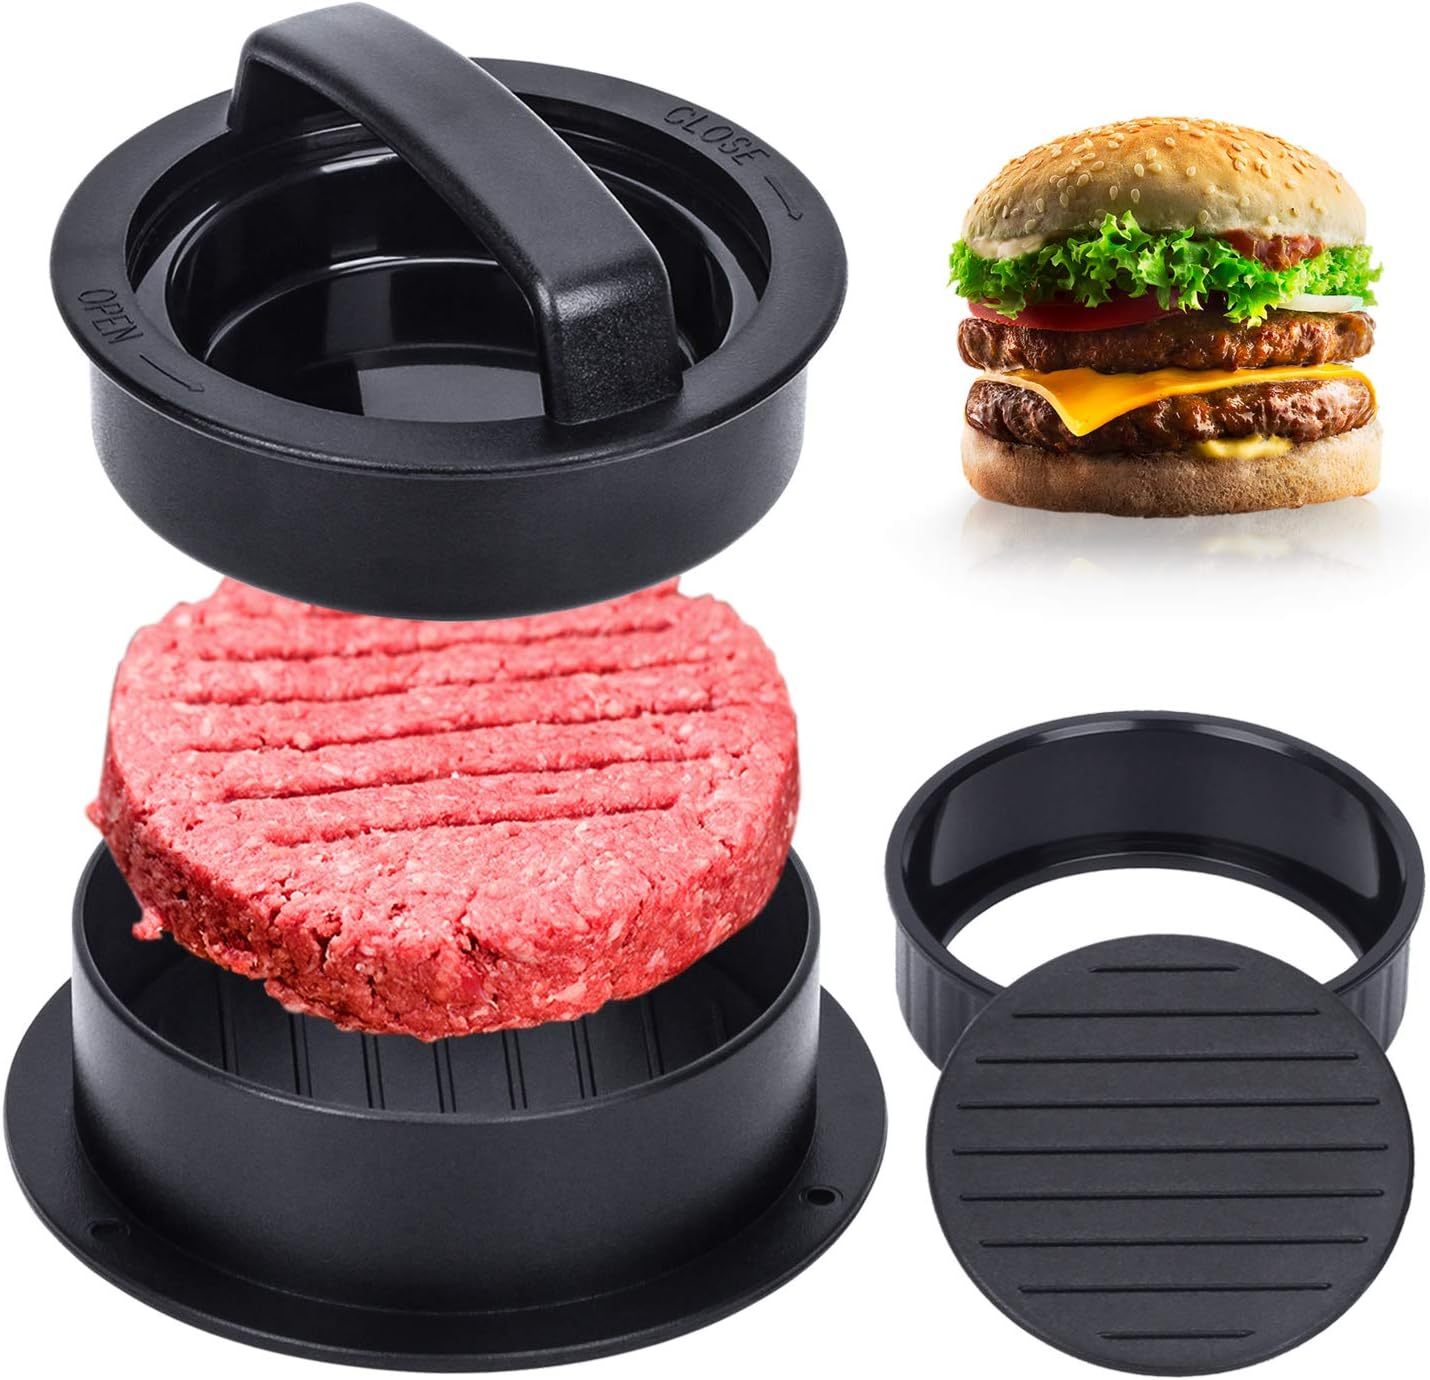 Hamburger Press, Hamburger Press Patty Maker, 3 in 1 Stuffed Burger Press Patty Maker, Patty Press for Stuffed Burgers, Sliders, Beef Burger, Non Stick Kitchen Barbecue Tool Grilling Accessories - Barbecue Whizz...Watch My Smoke!